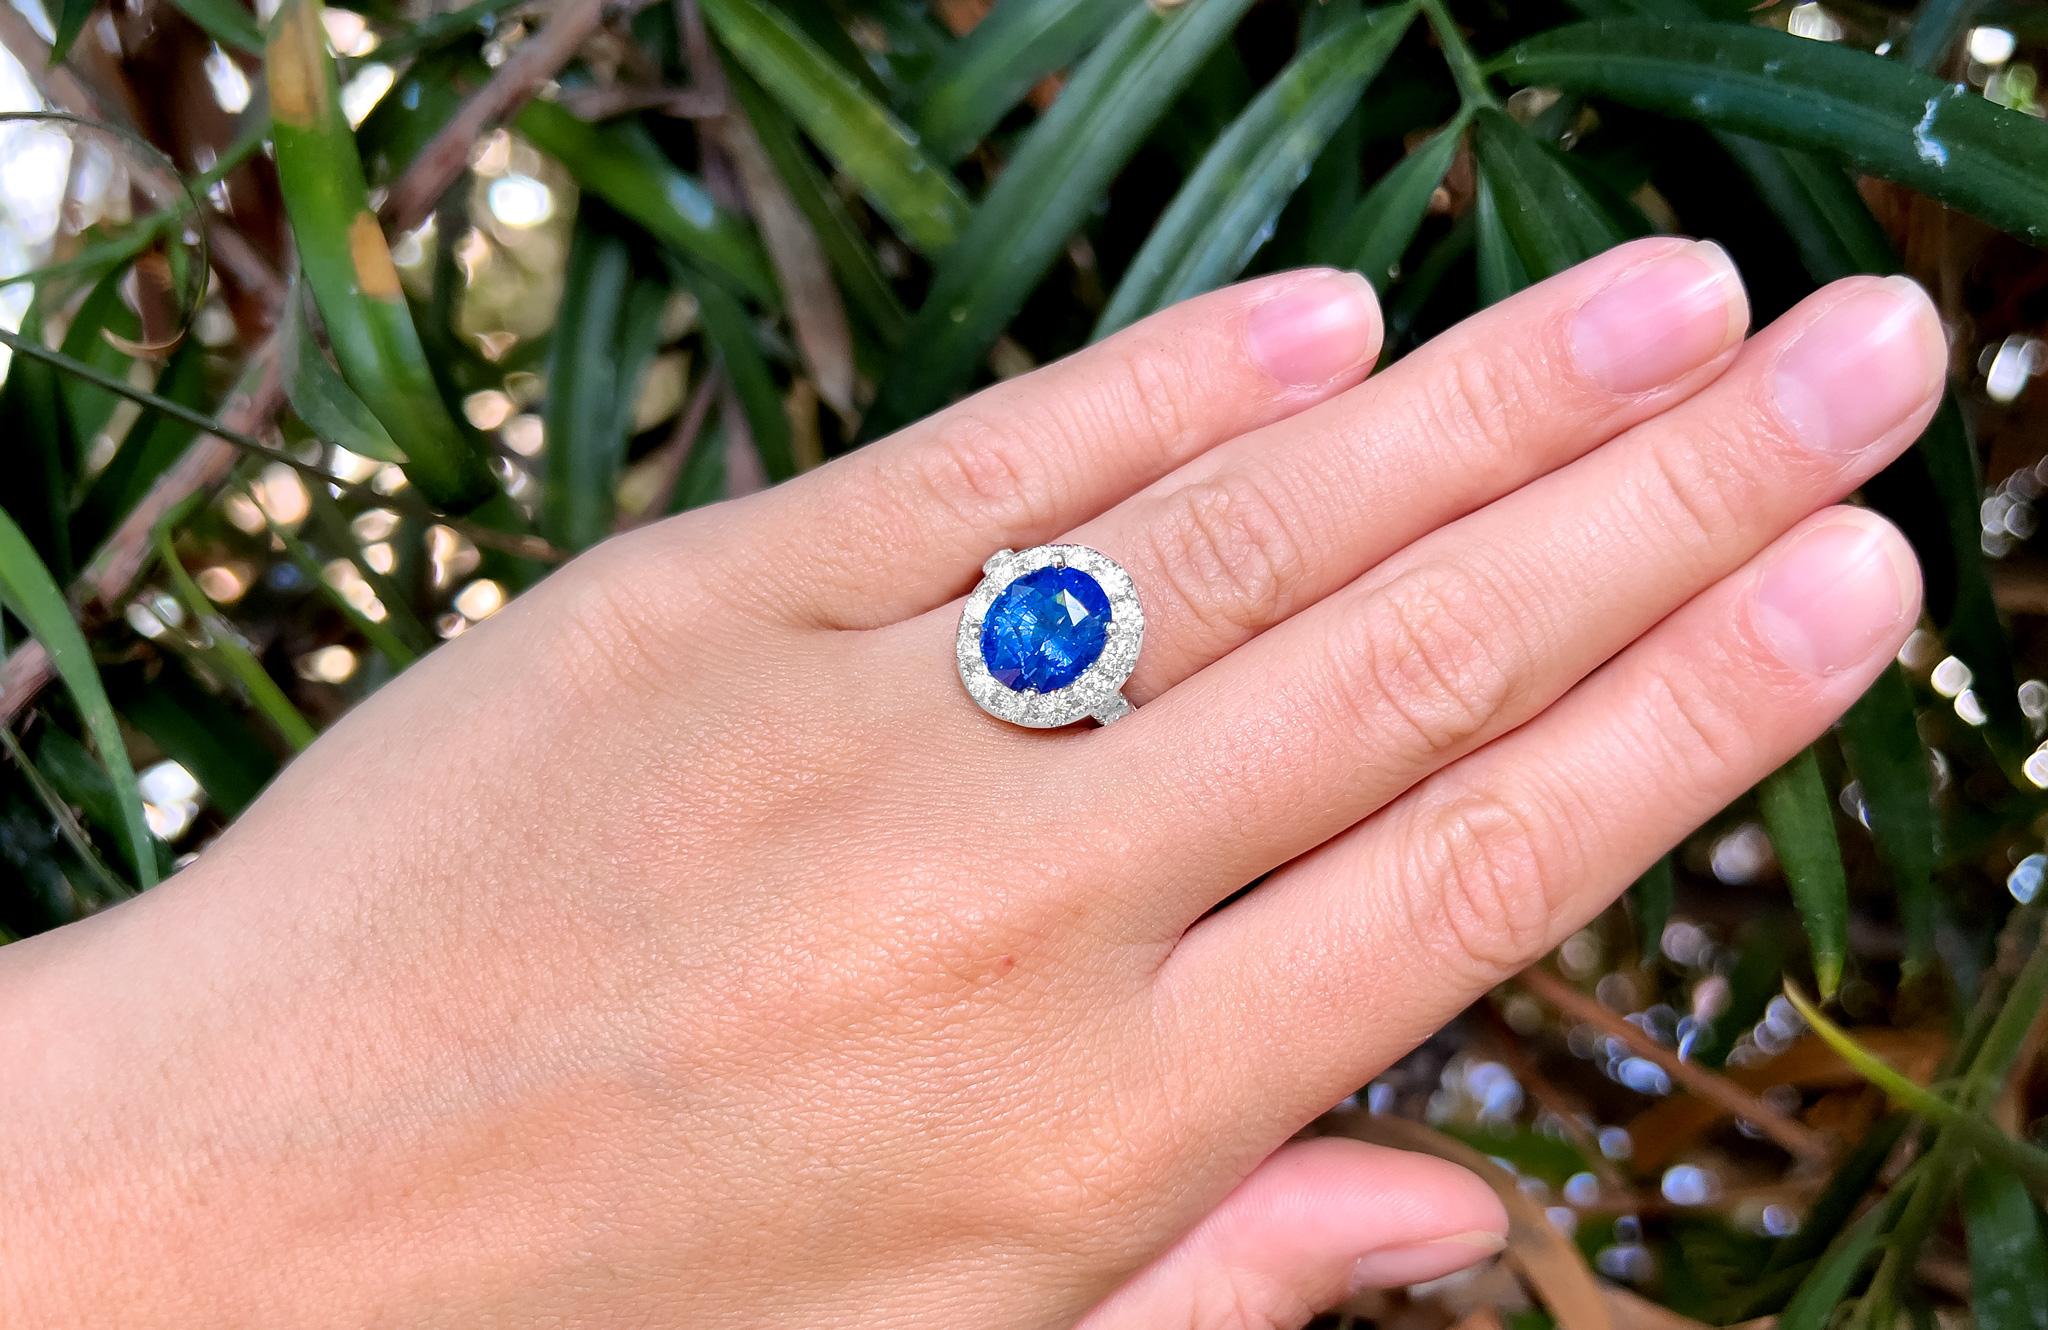 Fine Sapphire = 6.21 Carat
Cut: Oval
Diamonds = 1.54 Carats
( Color: F, Clarity: VS )
Metal: 18K Gold
Ring Size: 6.25* US
*It can be resized complimentary